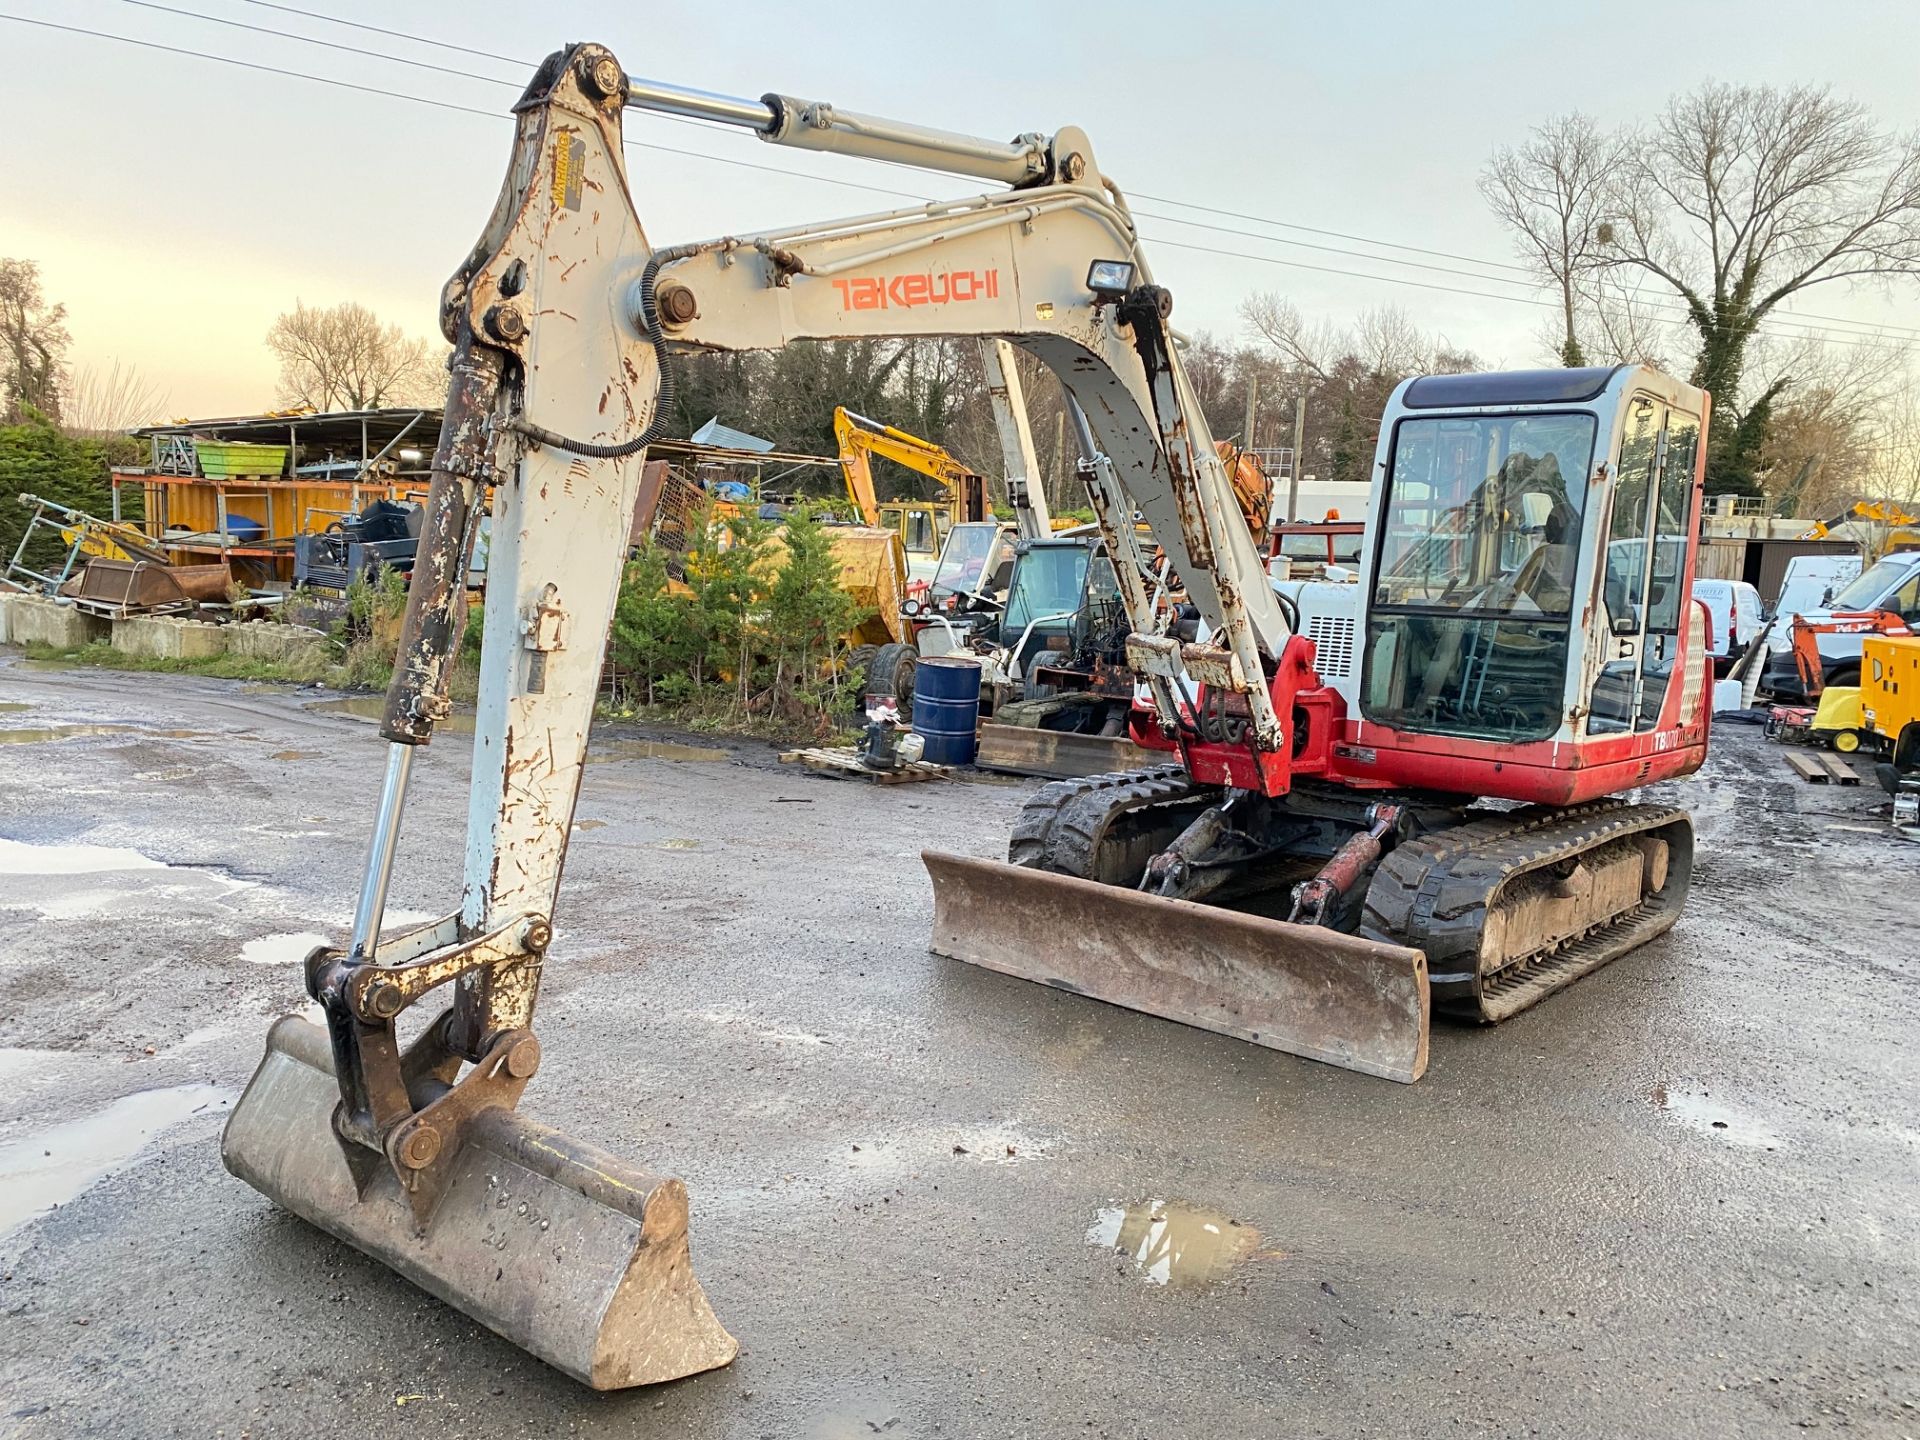 99 TAKEUCHI TB070 TON EXCAVATOR, 4500 HOURS, RECENT NEW TRACKS, STARTS AND RUNS WELL *PLUS VAT* - Image 2 of 7